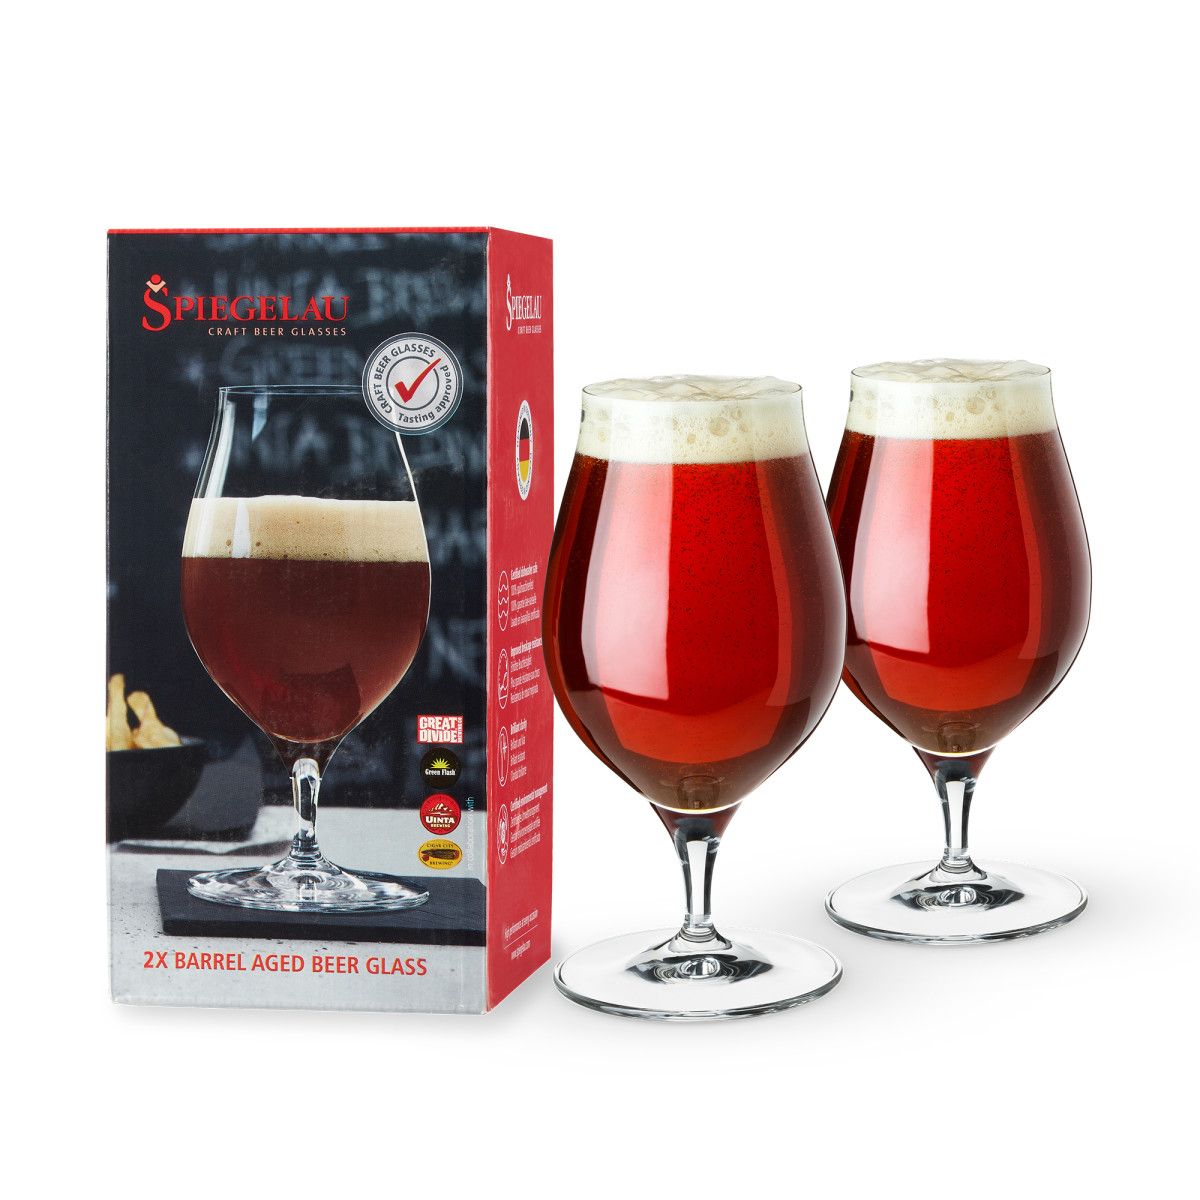 Spiegelau Craft Beer Glasses, Made in Germany And 2x Barrel Aged Crystal  Clarity